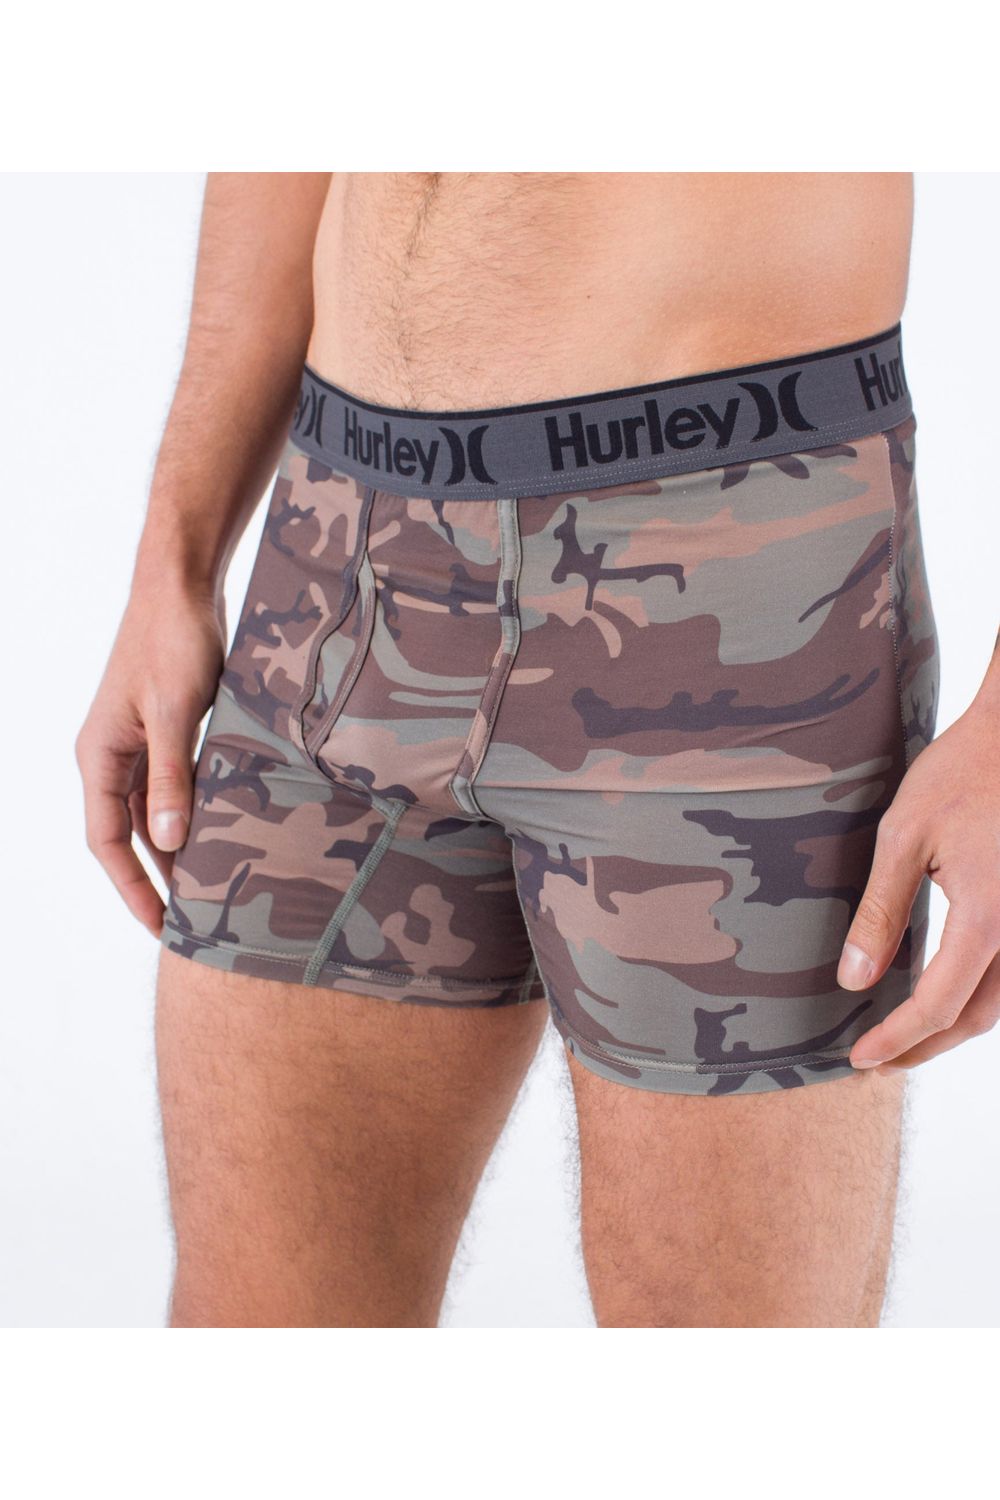 Hurley Supersoft Boxer 3Pk